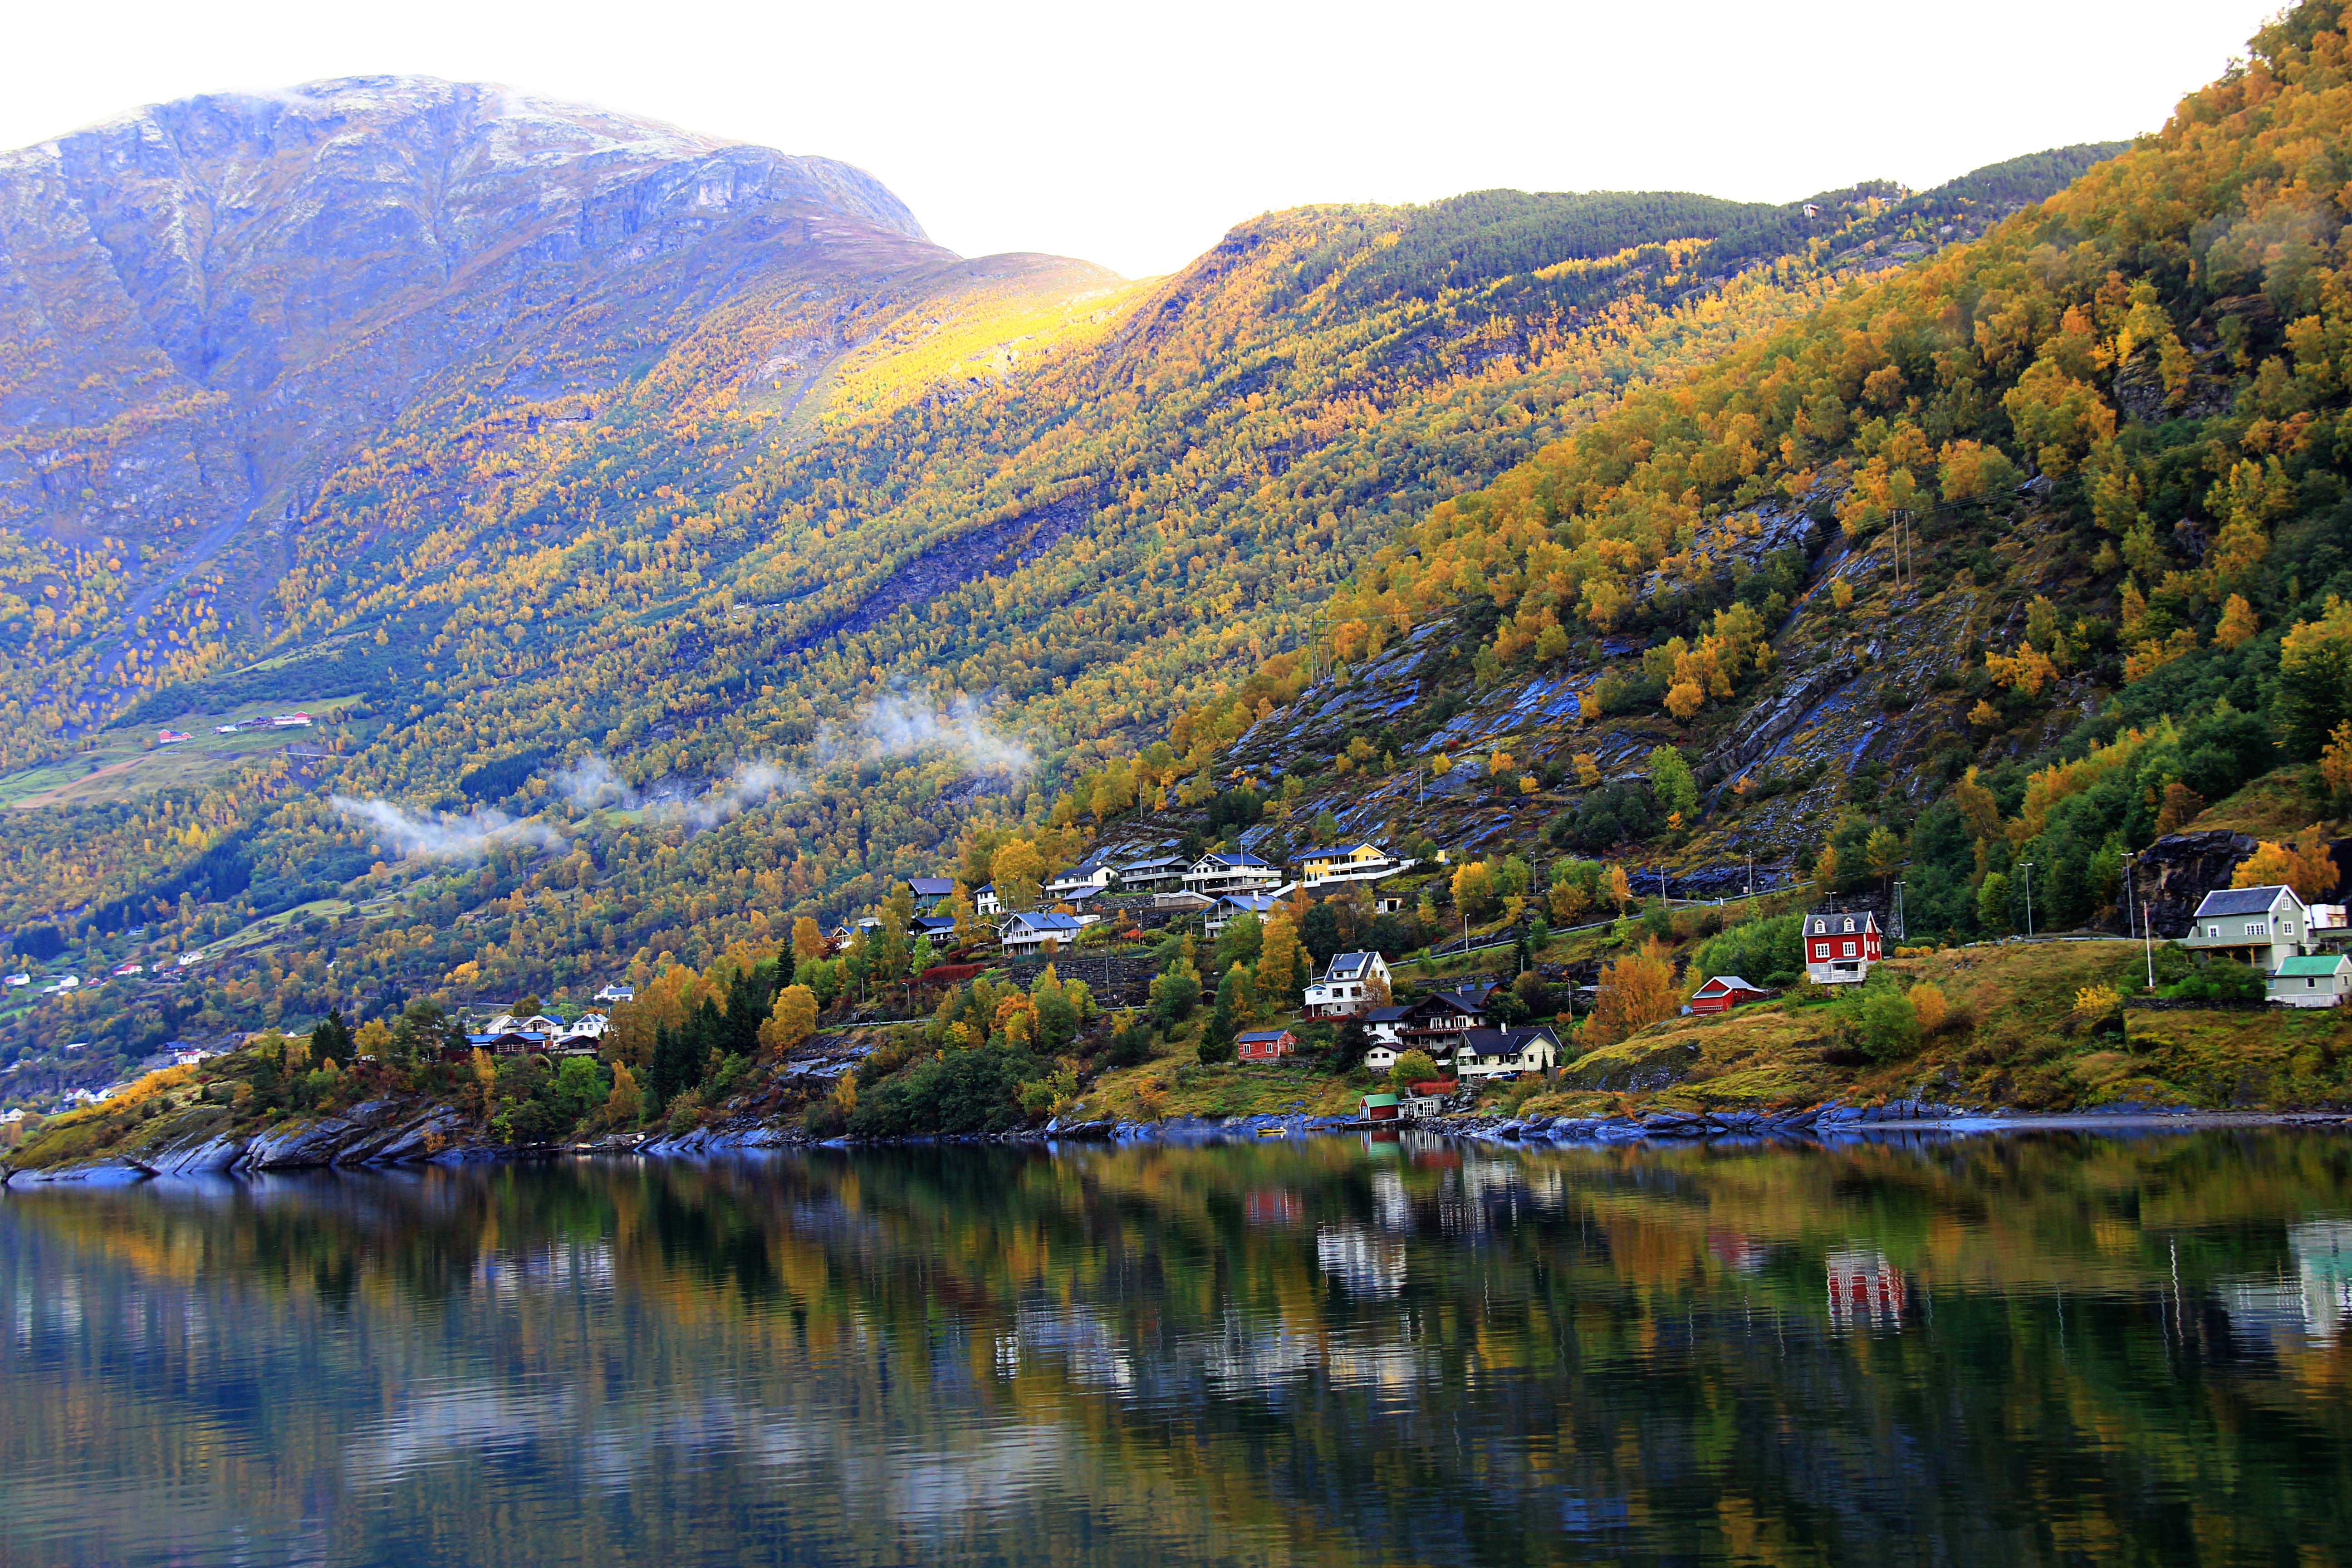 Sticking to a Diet on Vacation: How We Ate Vegan in Norway